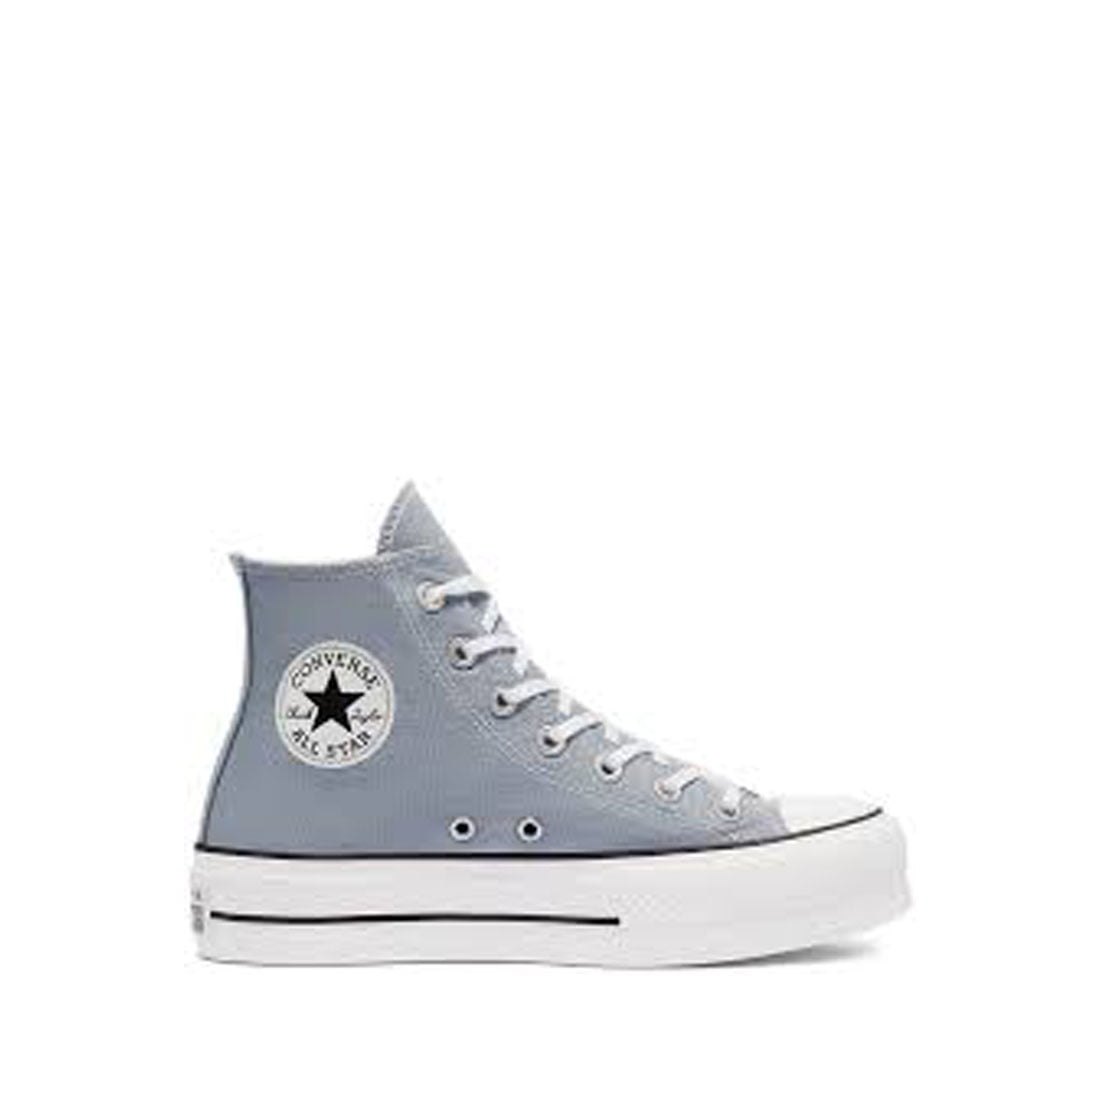 converse all star white womens size 8